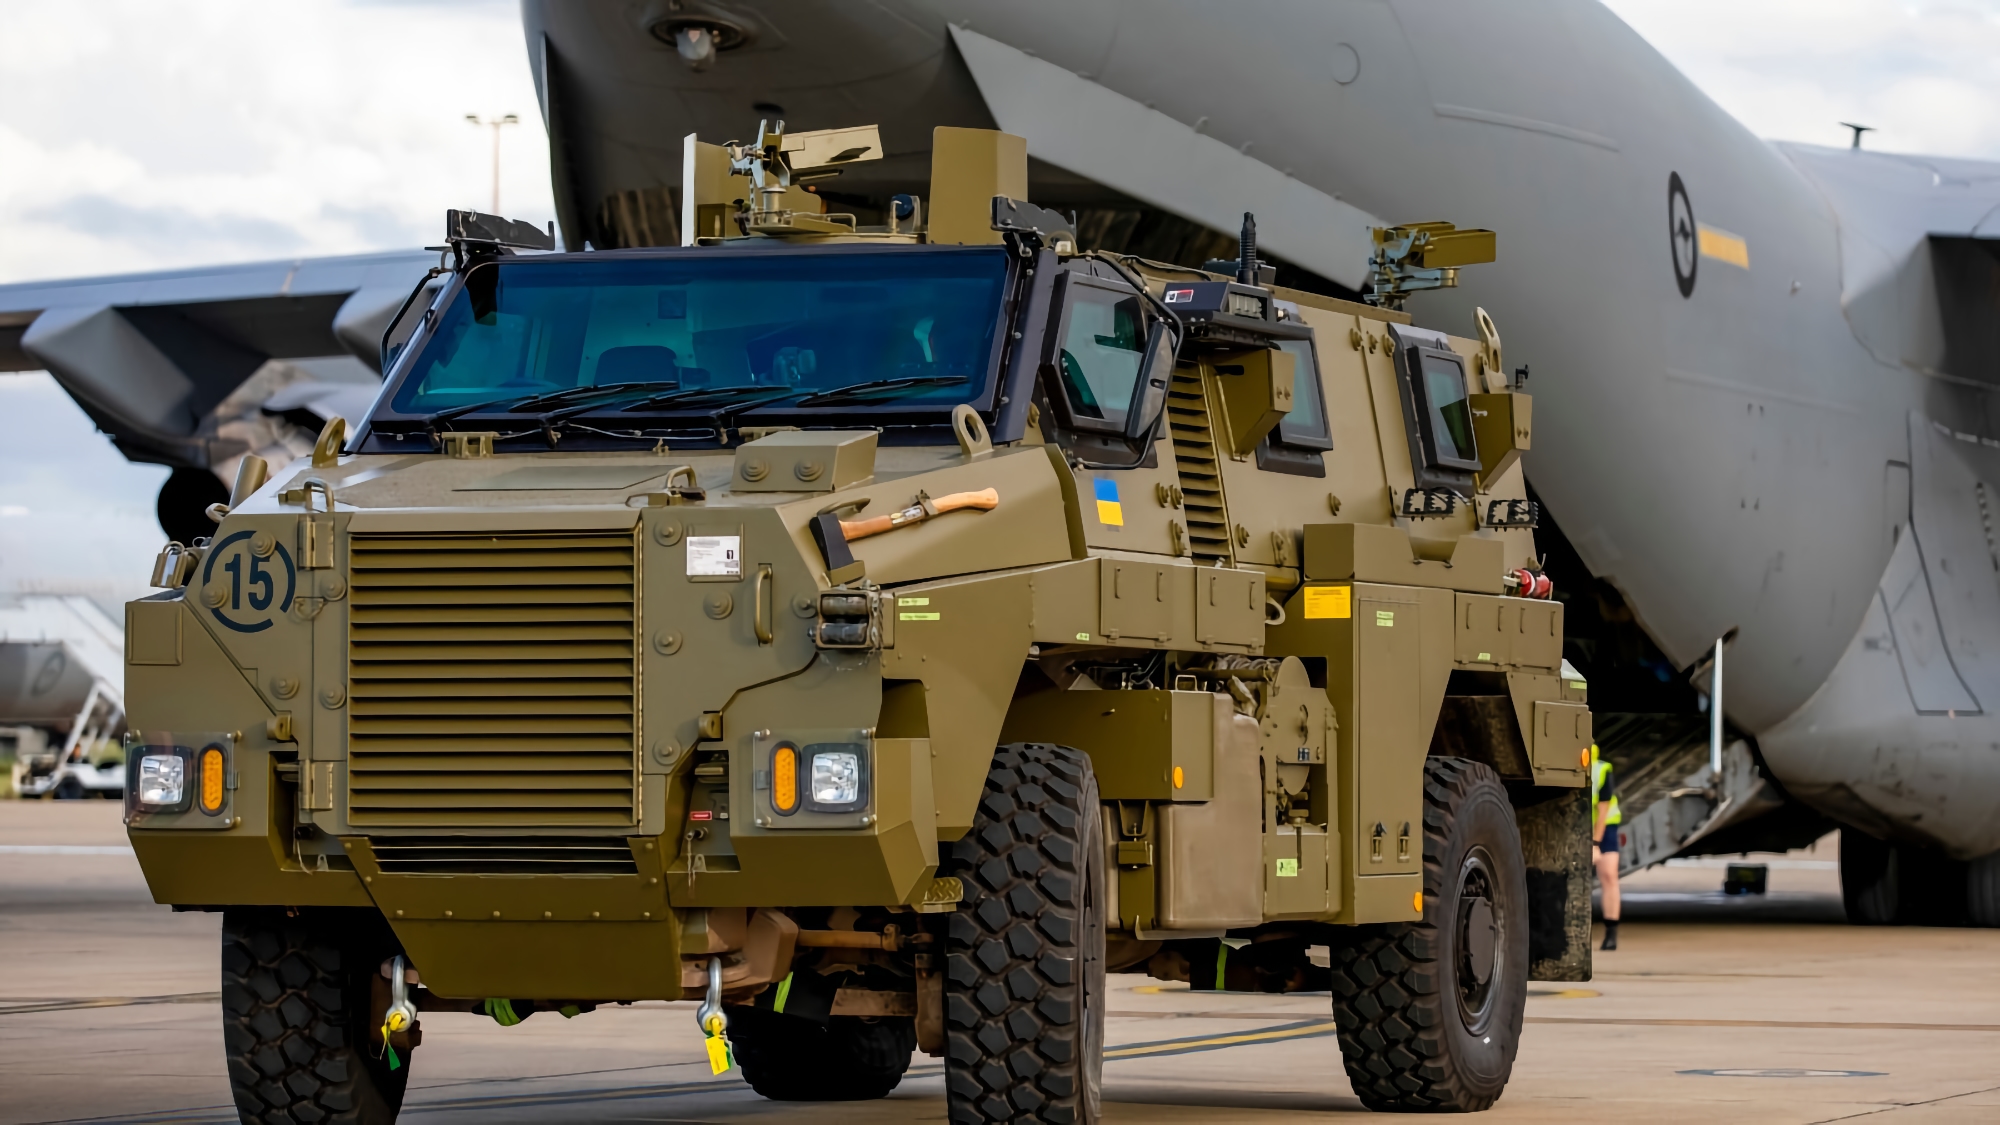 Bushmaster armored vehicles, M113 armored personnel carriers and medical equipment: Australia will transfer a new batch of military aid to Ukraine